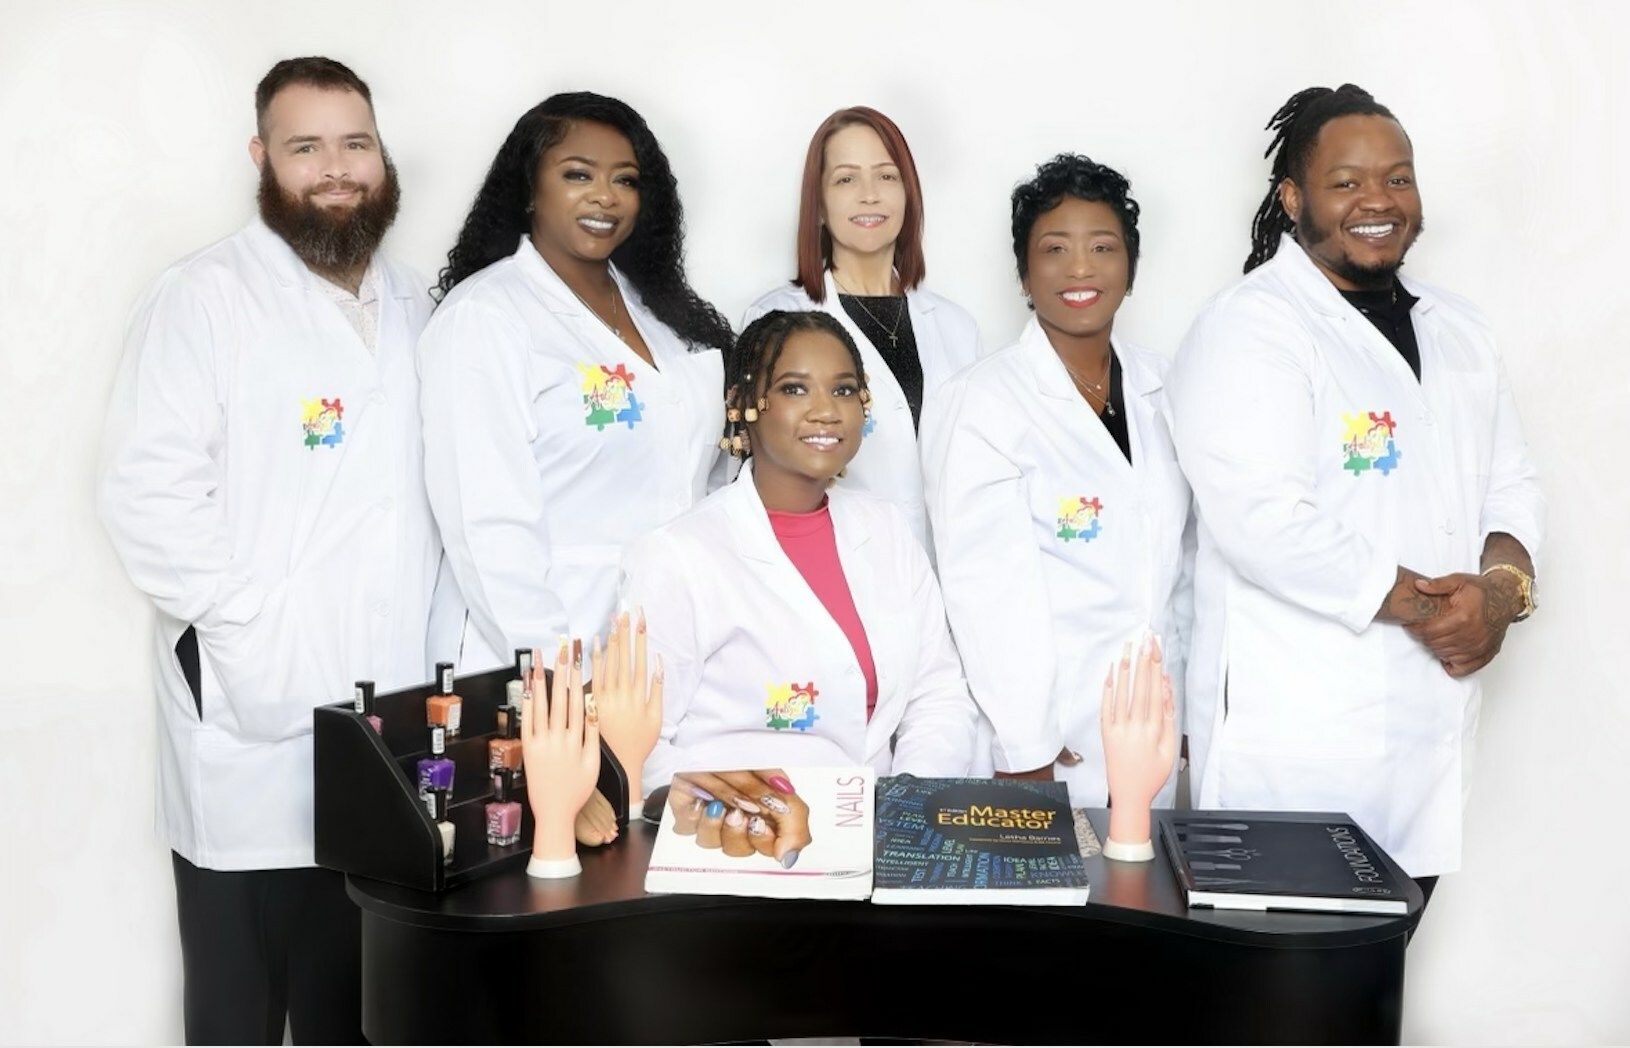 21-year-old Black entrepreneur with autism opening nail school in Georgia for people living with disability